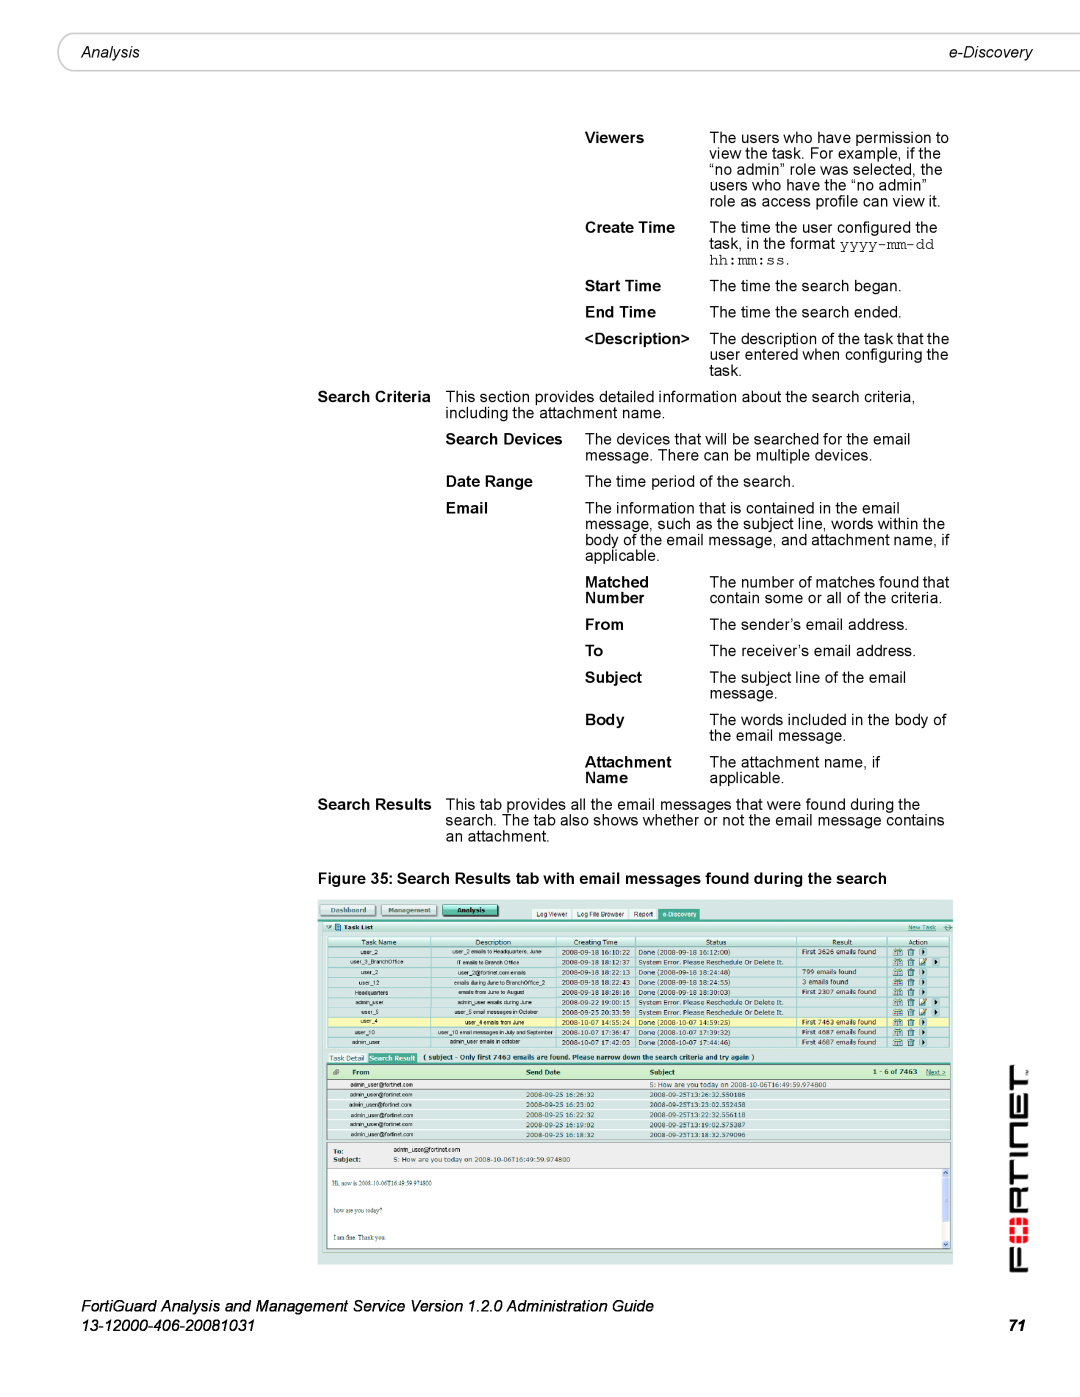 Fortinet 1.2.0 manual Analysis, view the task. For example, if the, 13-12000-406-20081031 